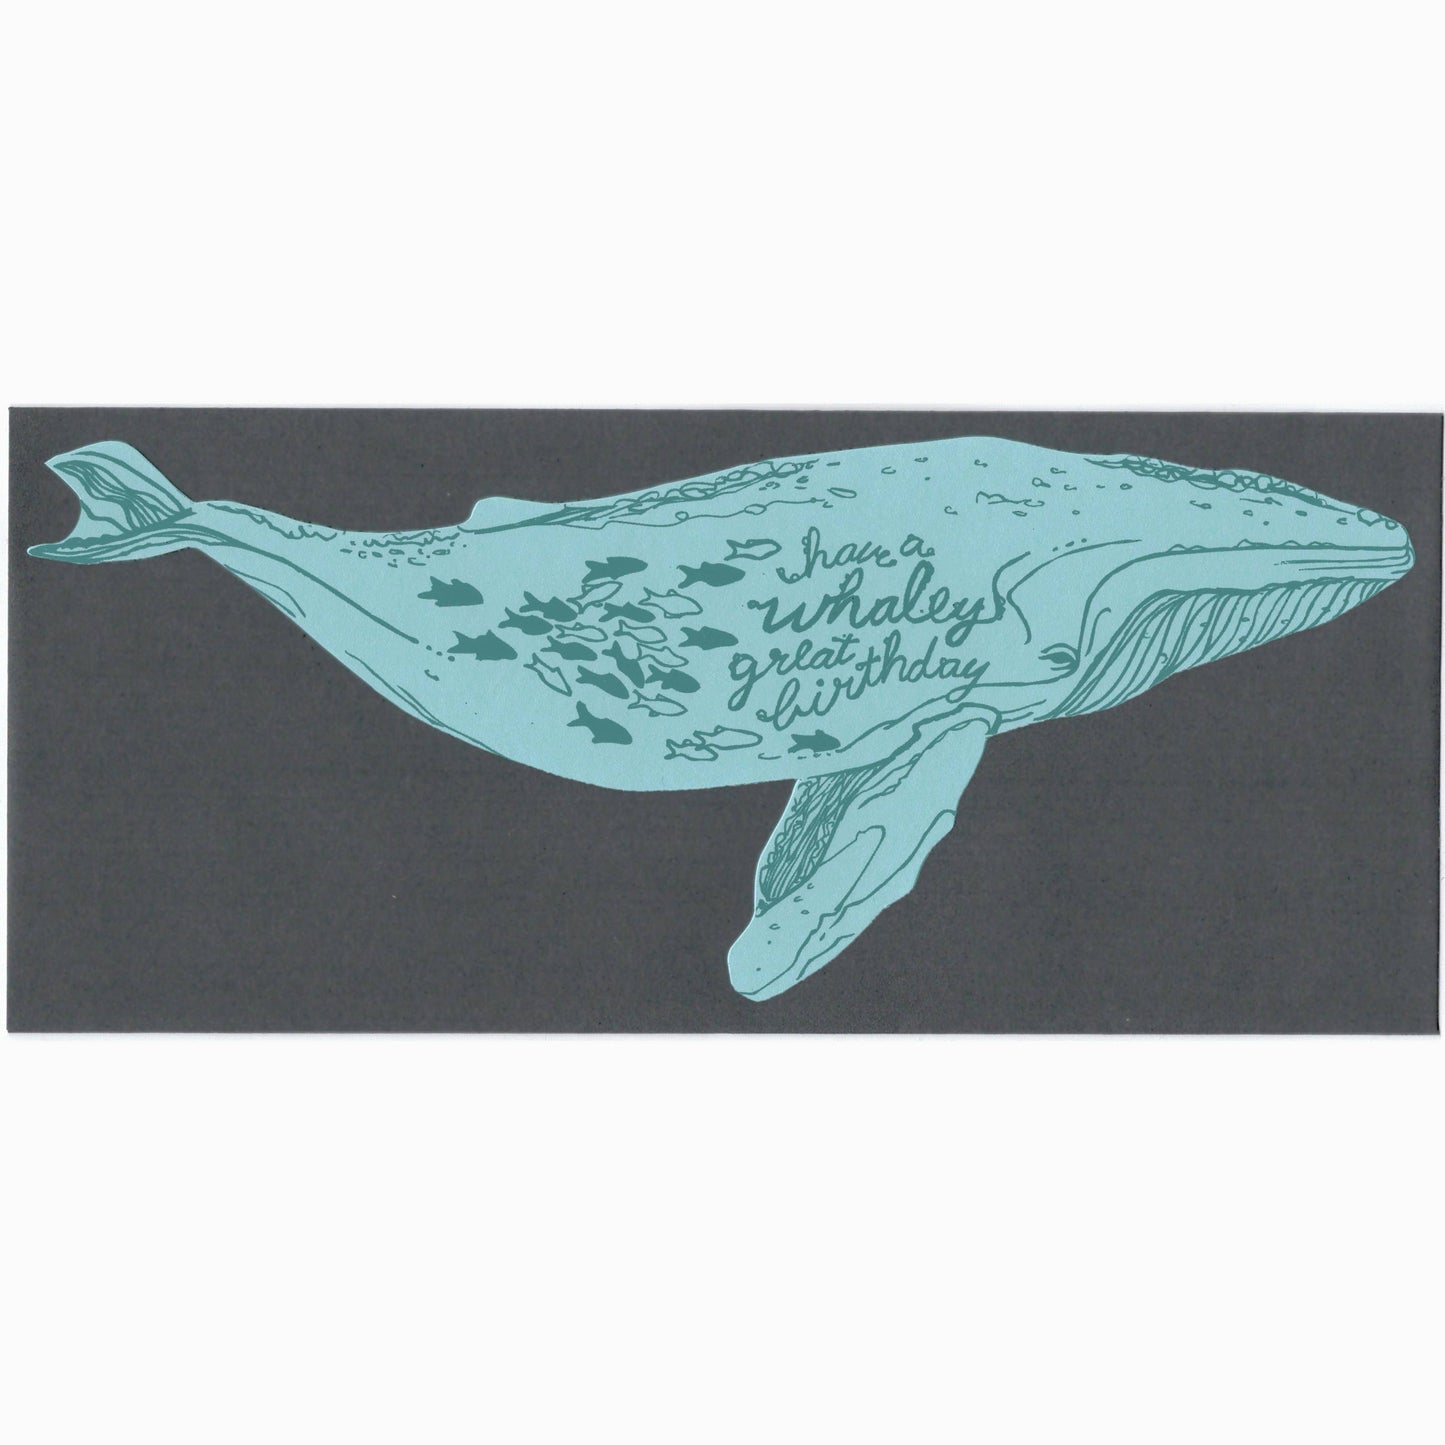 Whaley Great Greeting Card